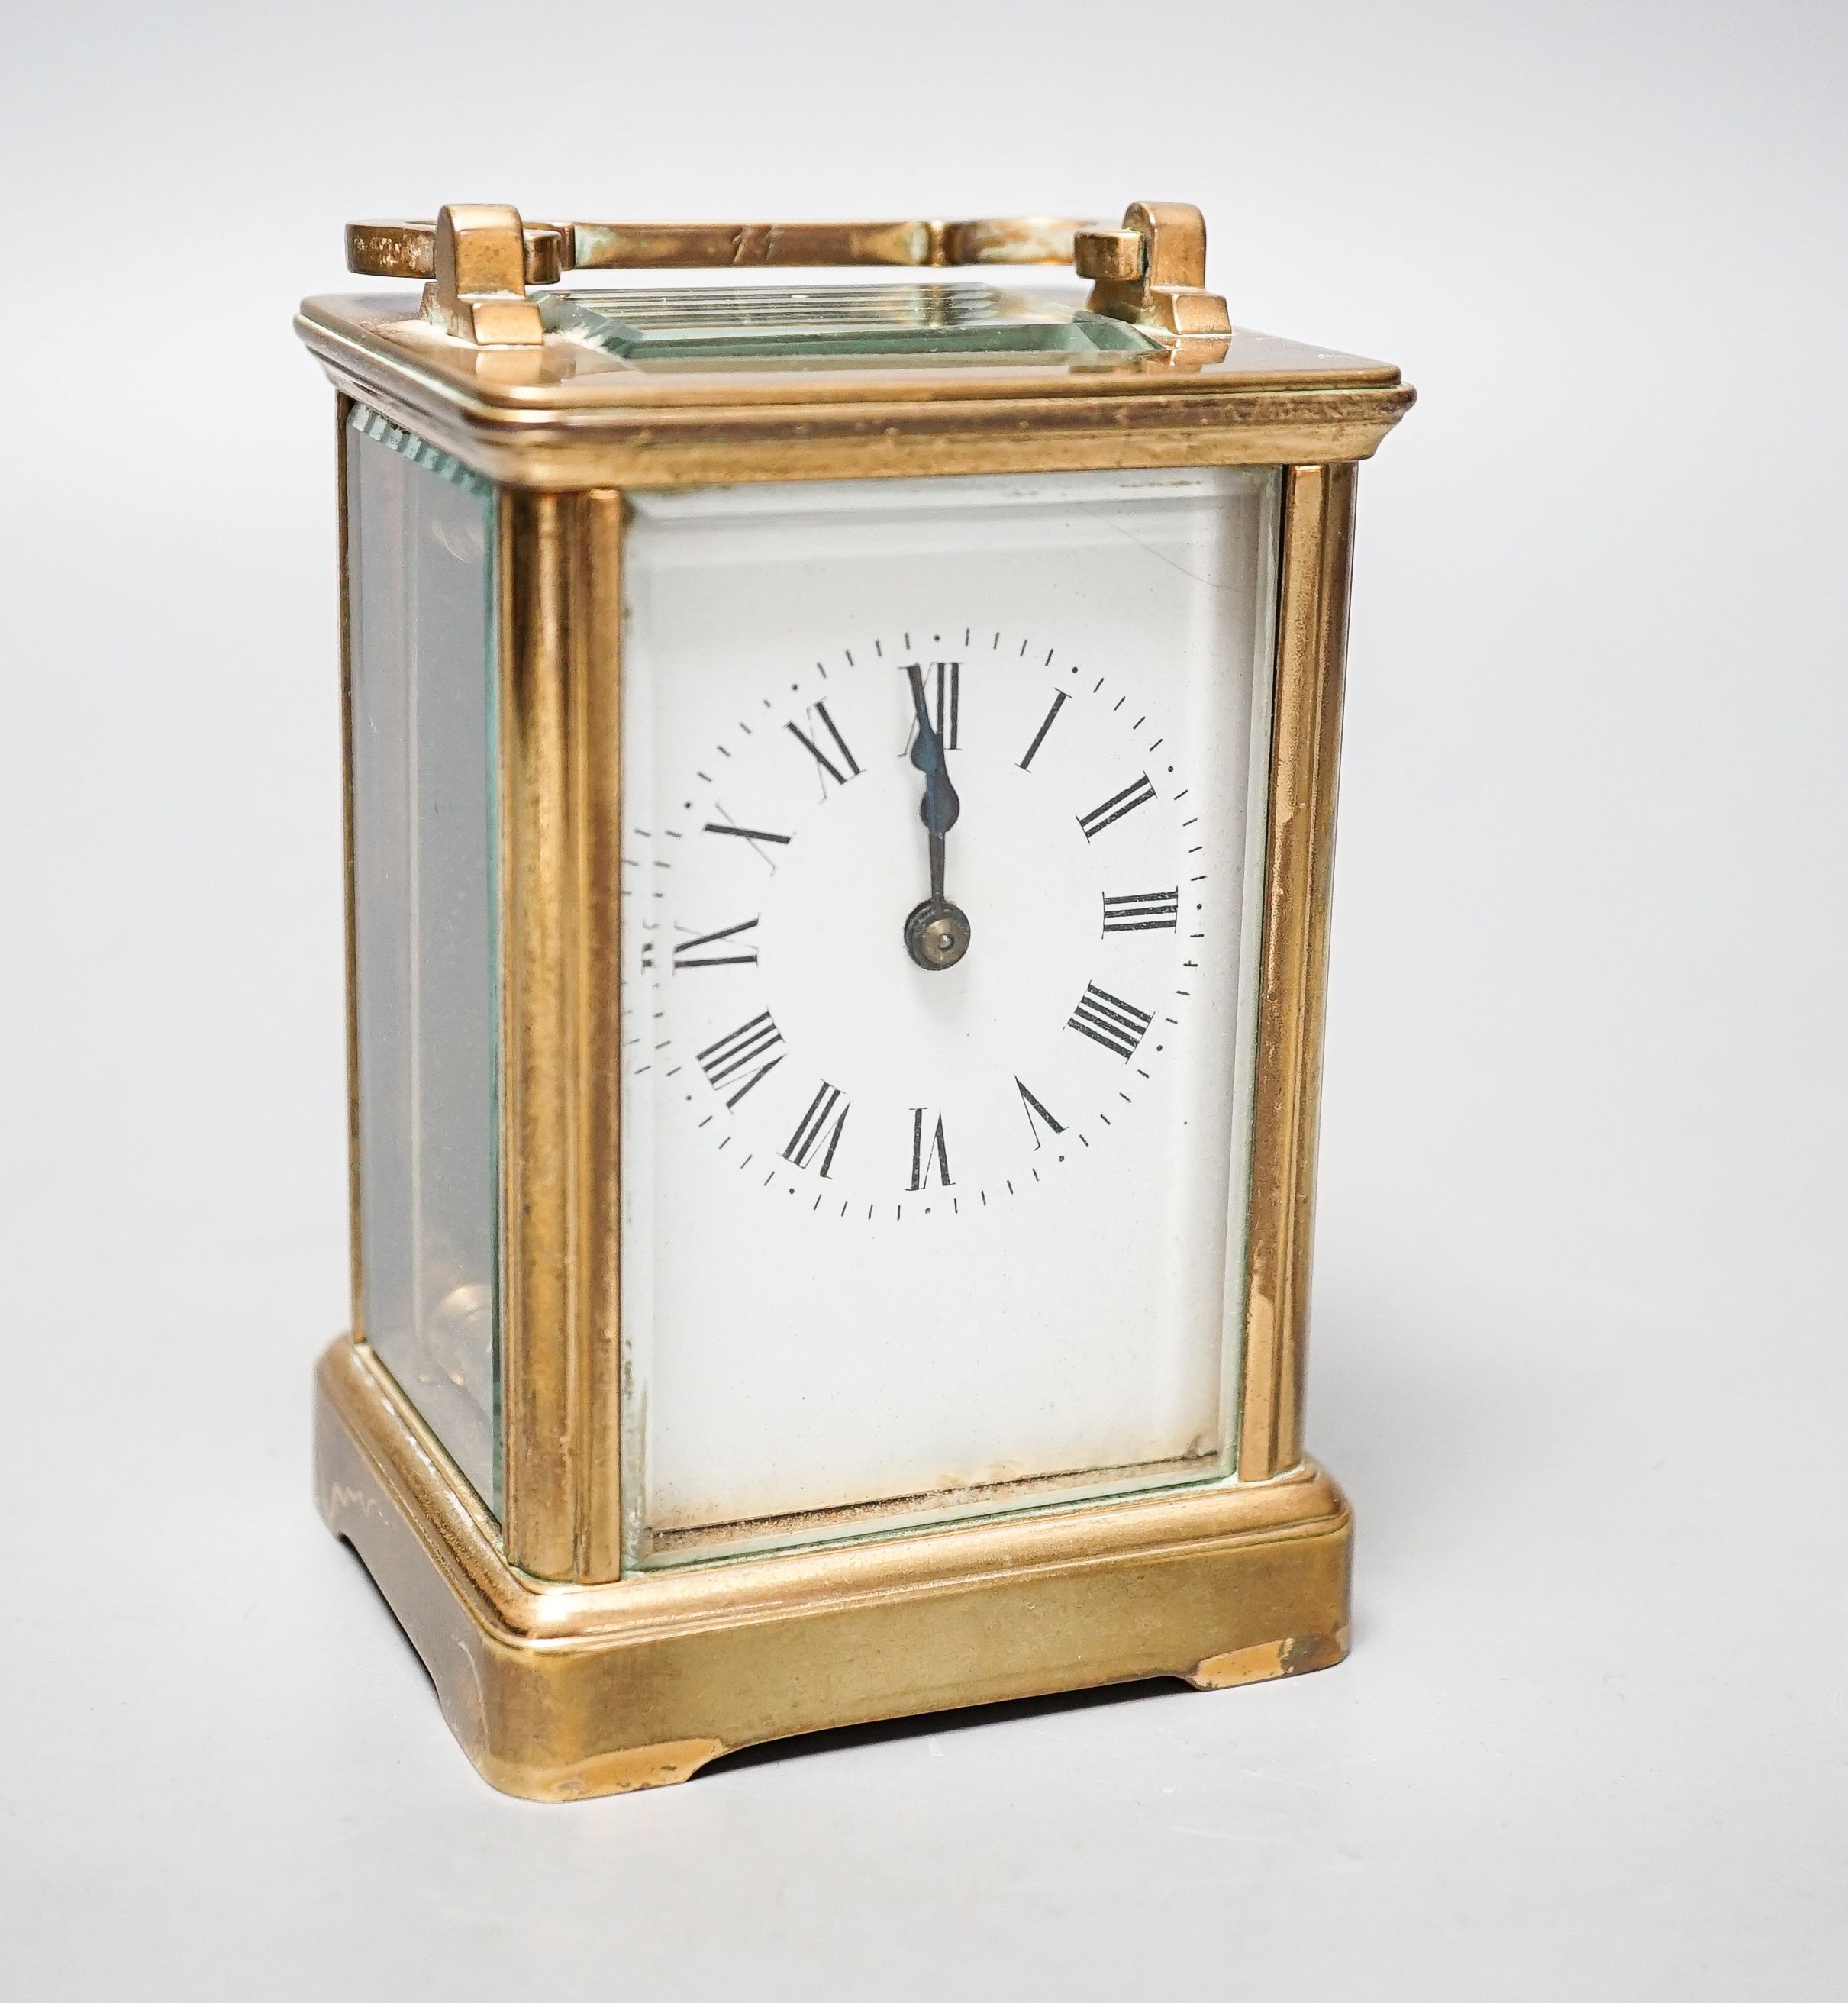 A brass cased French eight day carriage timepiece, 12cm high with key. *This lot is being sold in aid of the charity Prostate Cancer UK with 100% of the hammer price going to the charity”